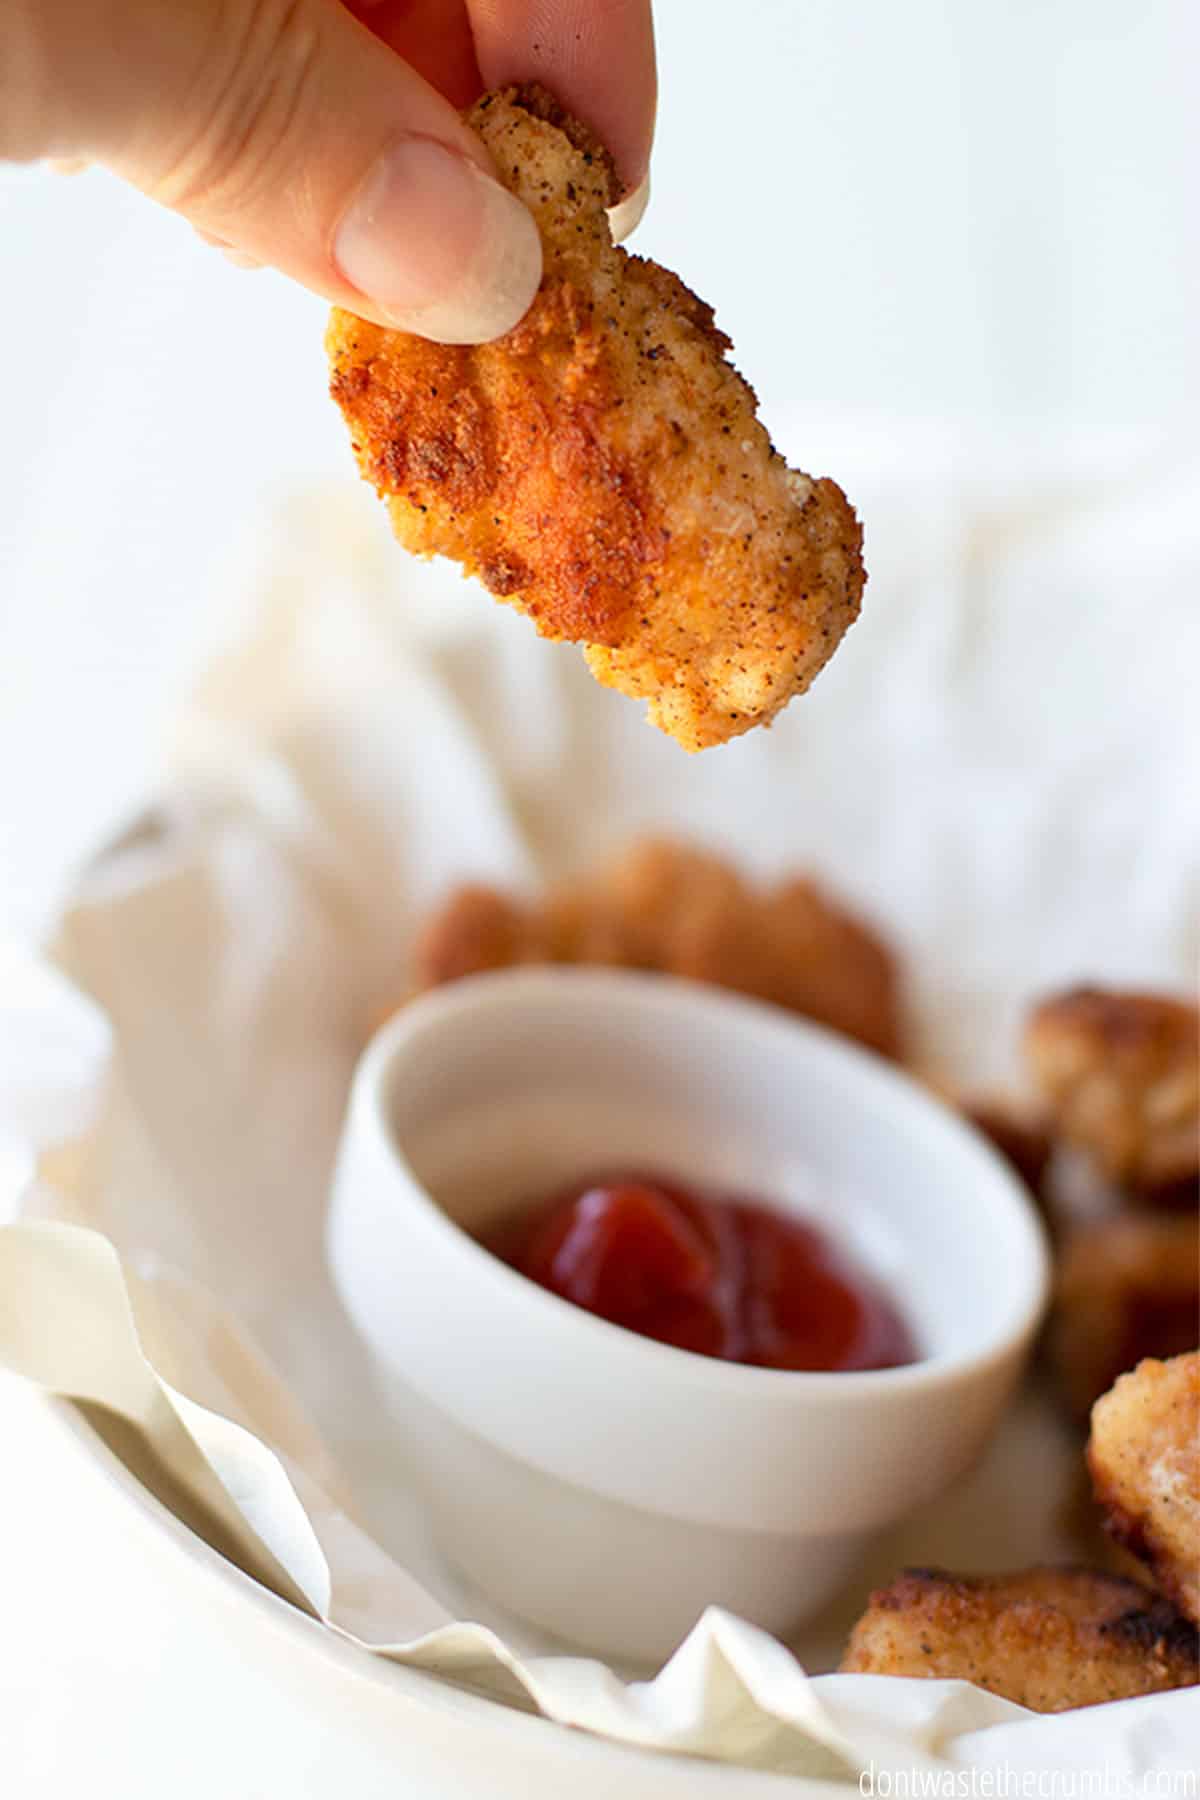 A crispy nugget hovers above a small dish of homemade barbecue sauce.